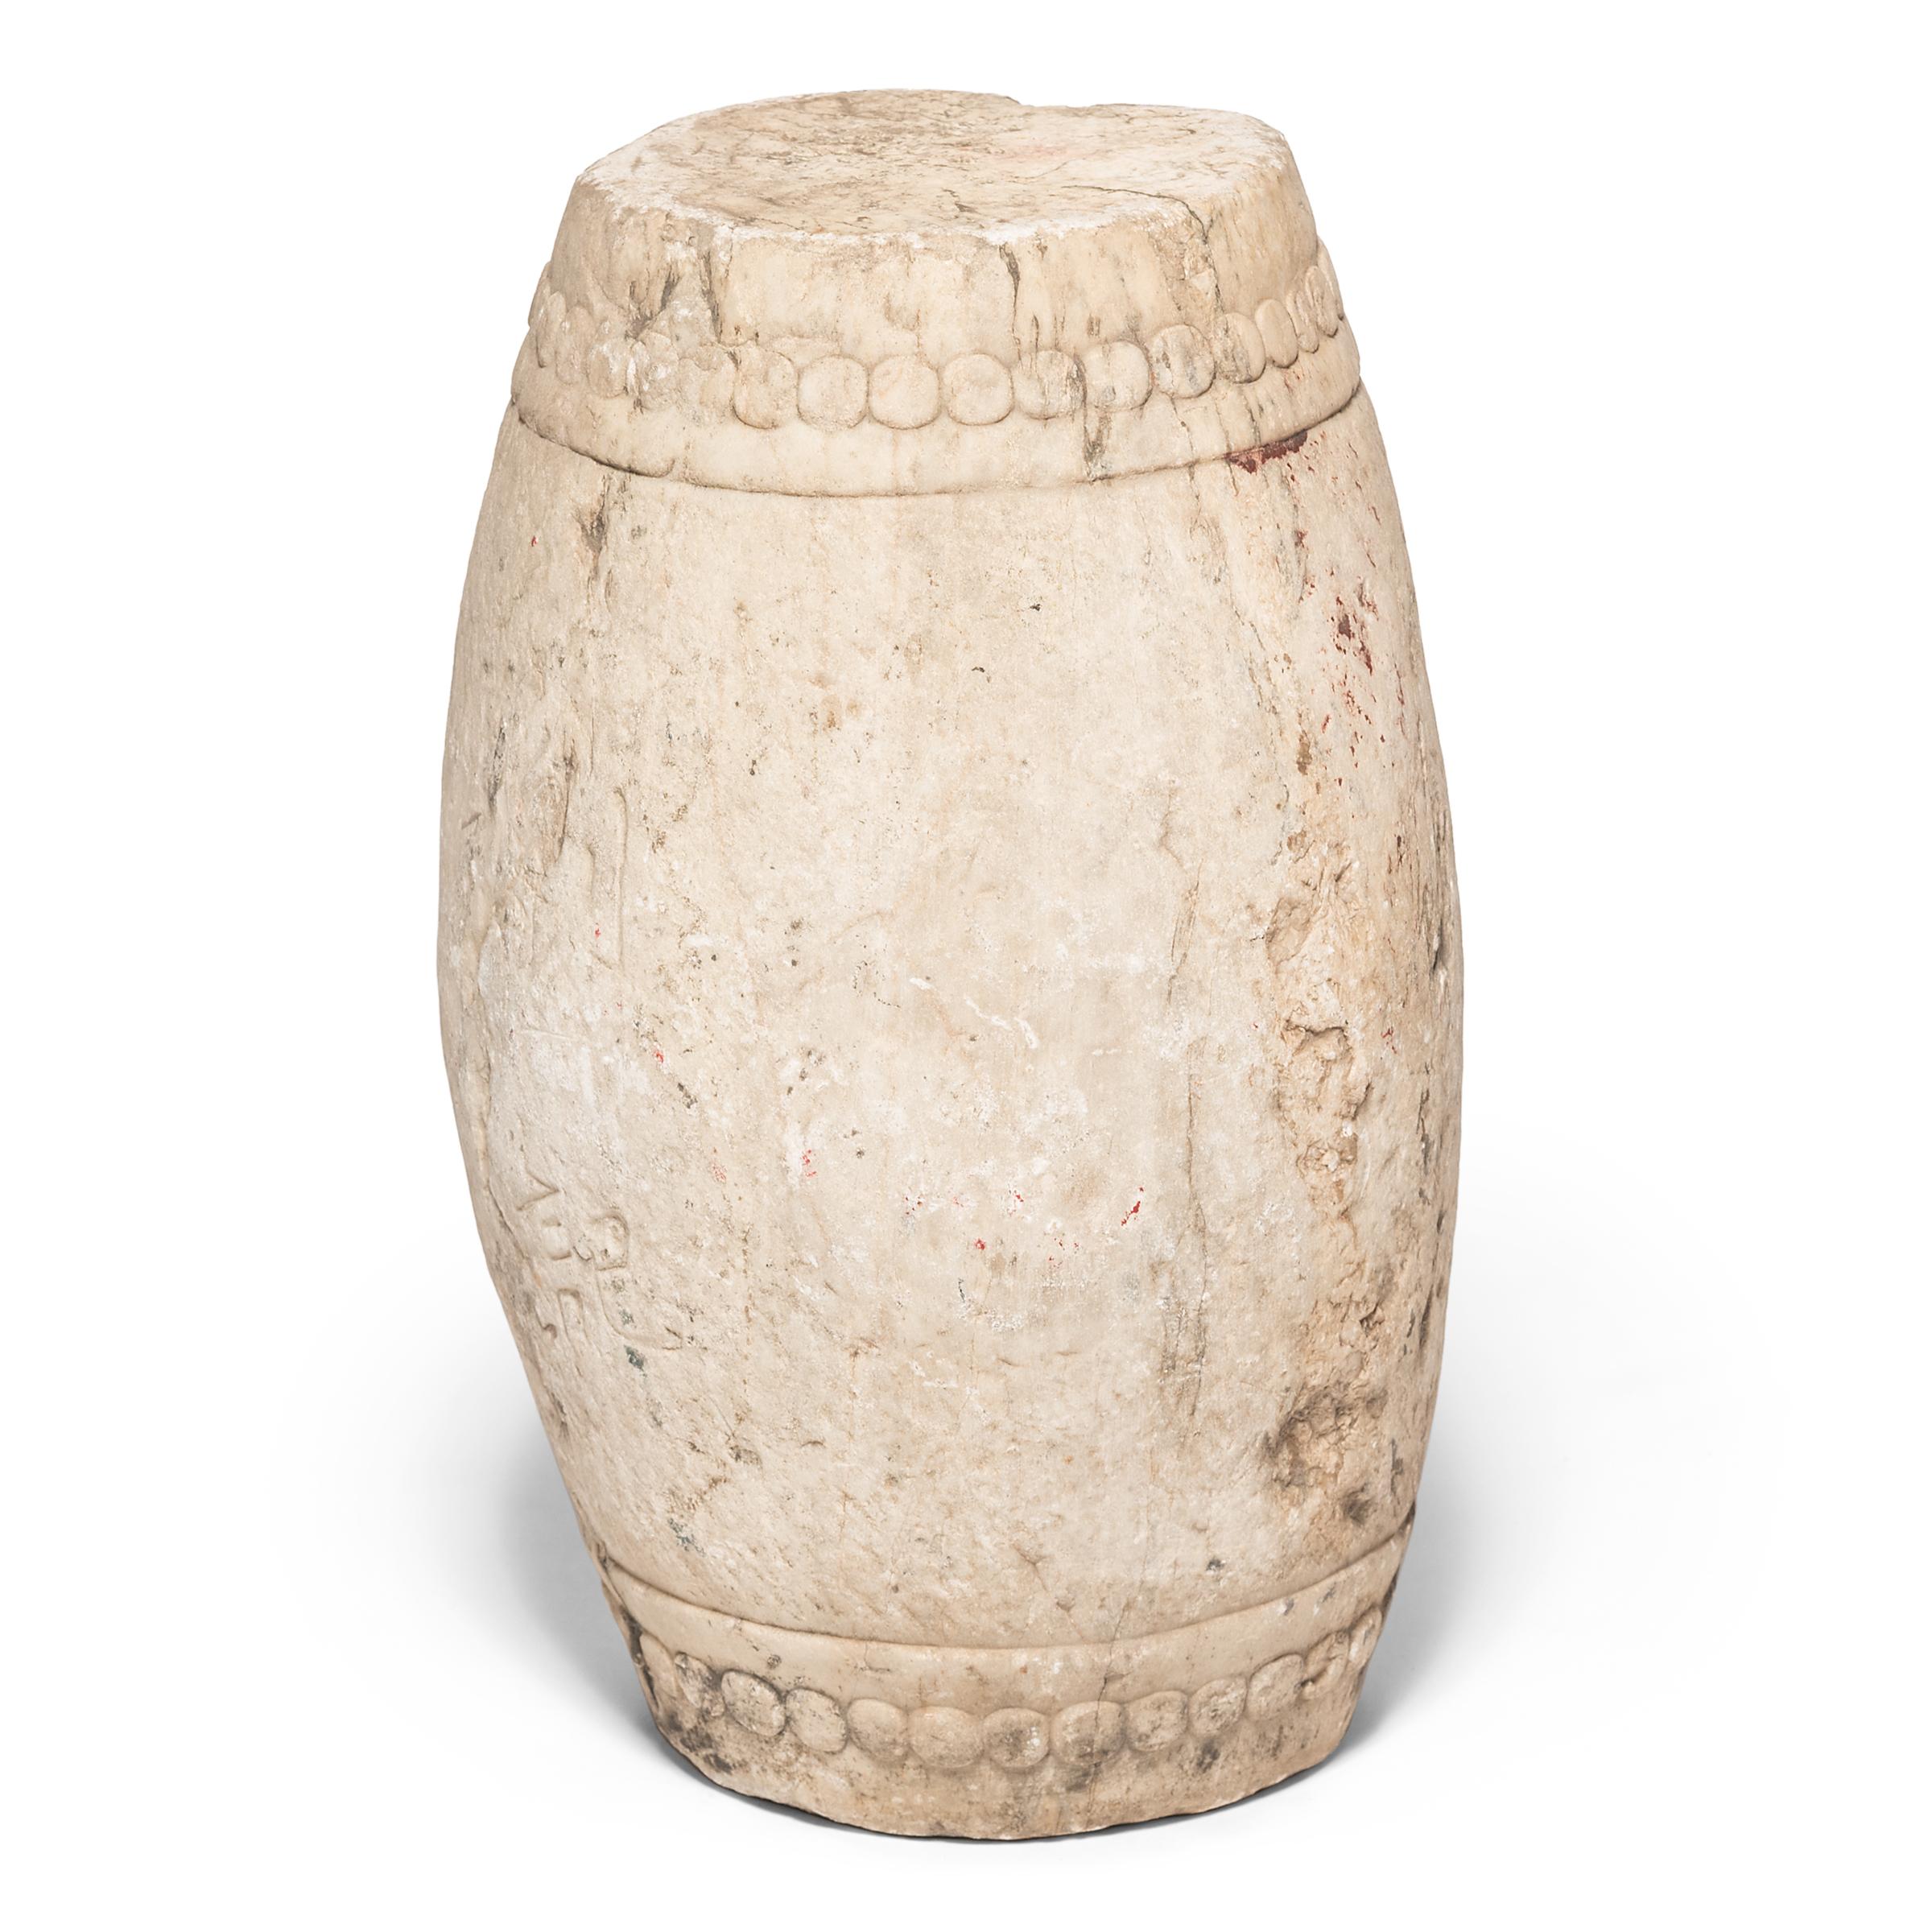 Carved from a single block of white marble, this early 19th-century garden stool has a traditional drum-form shape. Ringing both its top and bottom, a pattern of boss-head nails imitates those used to stretch a skin on an actual drum. The stool